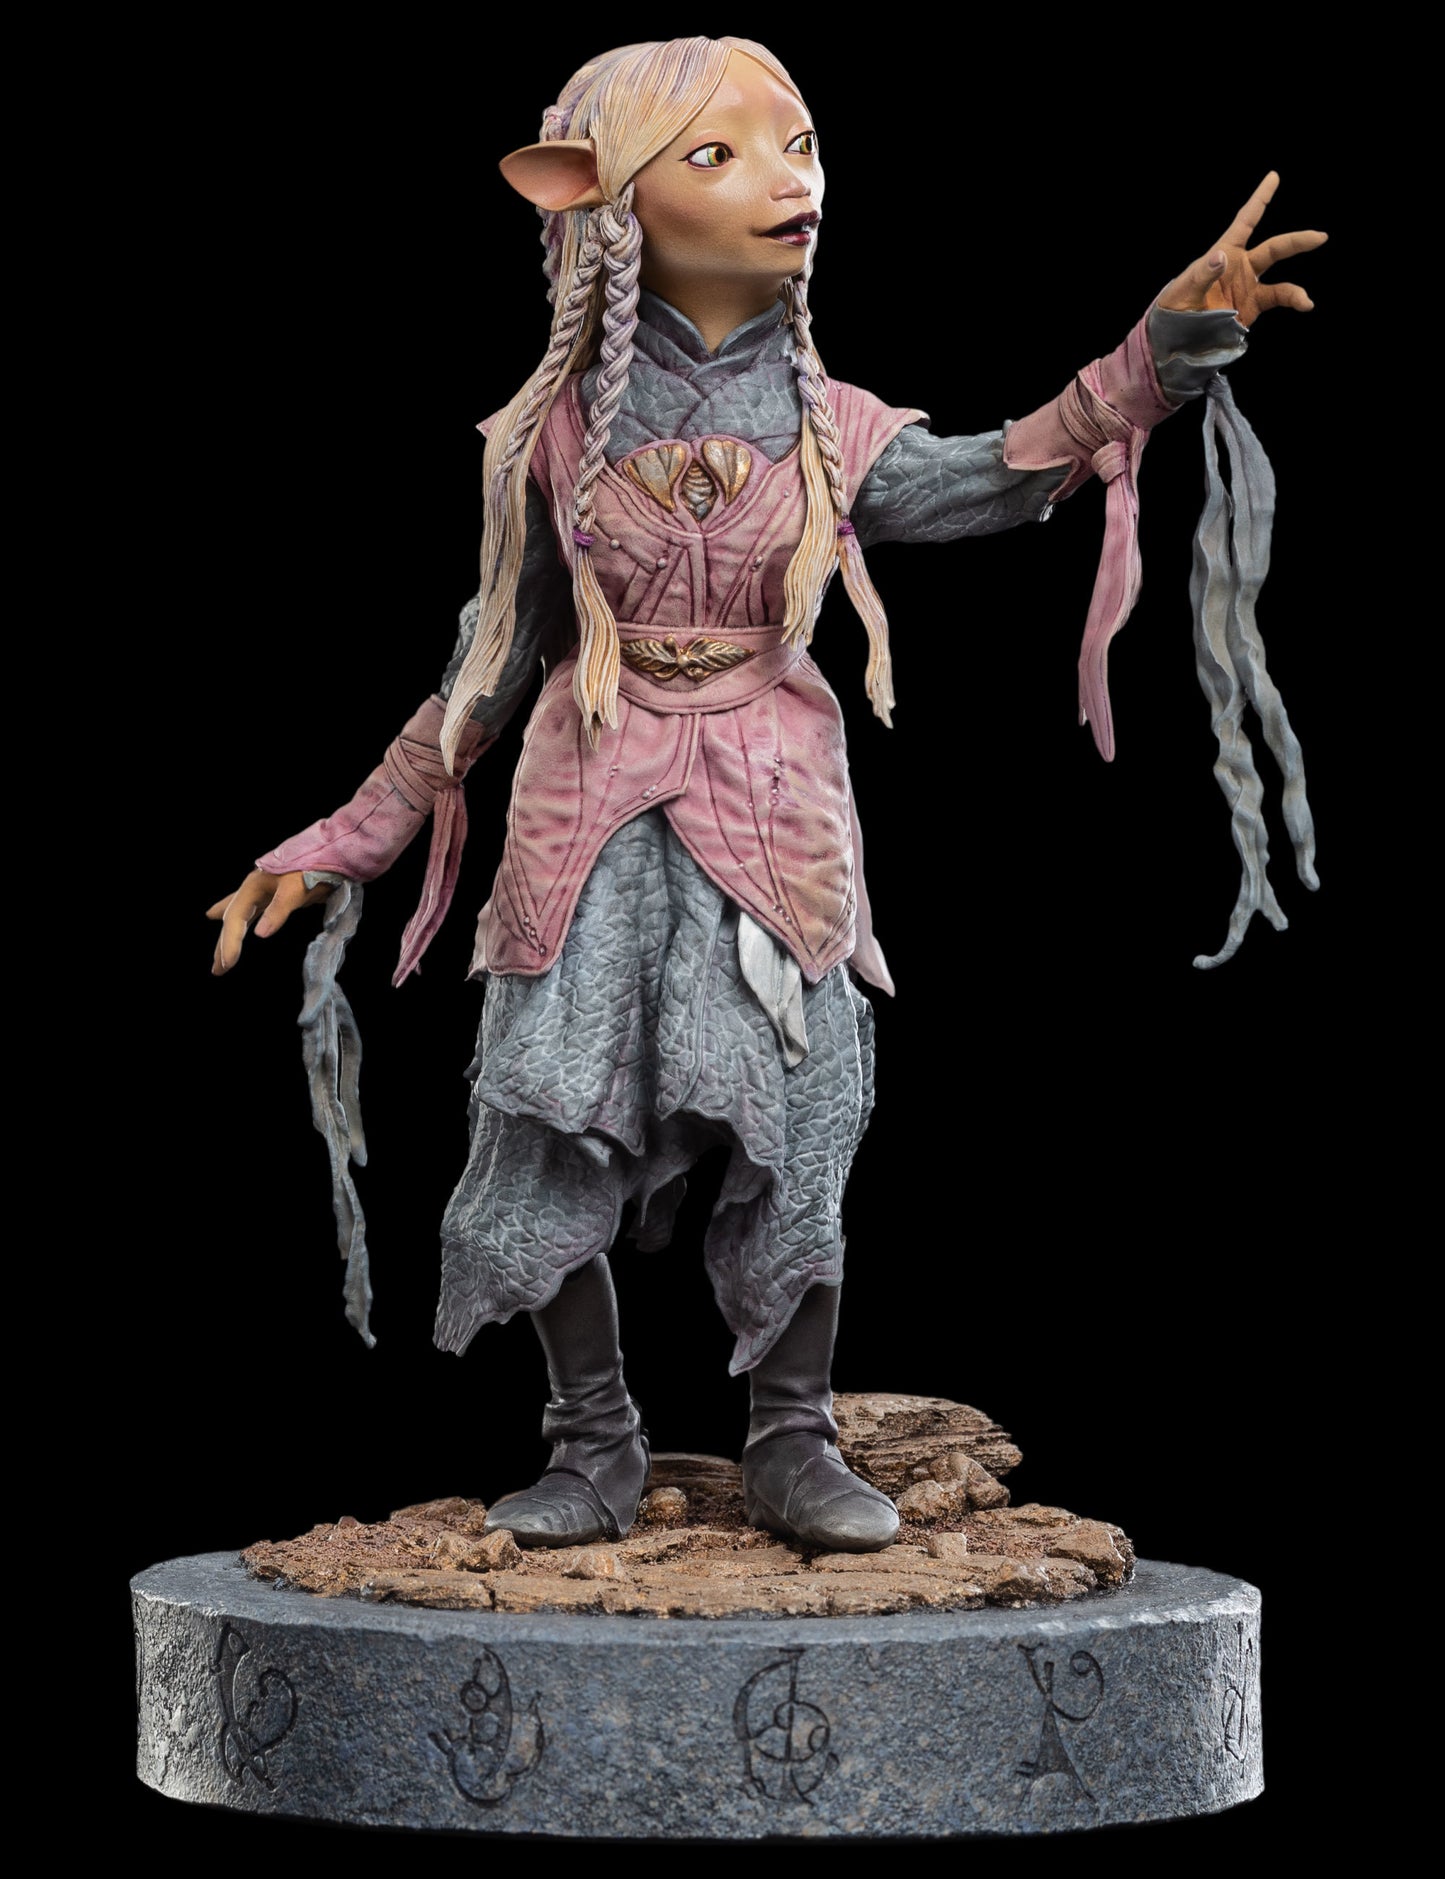 Load image into Gallery viewer, Brea The Gelfling (The Dark Crystal: Age of Resistance) 1:6 Scale Statue
